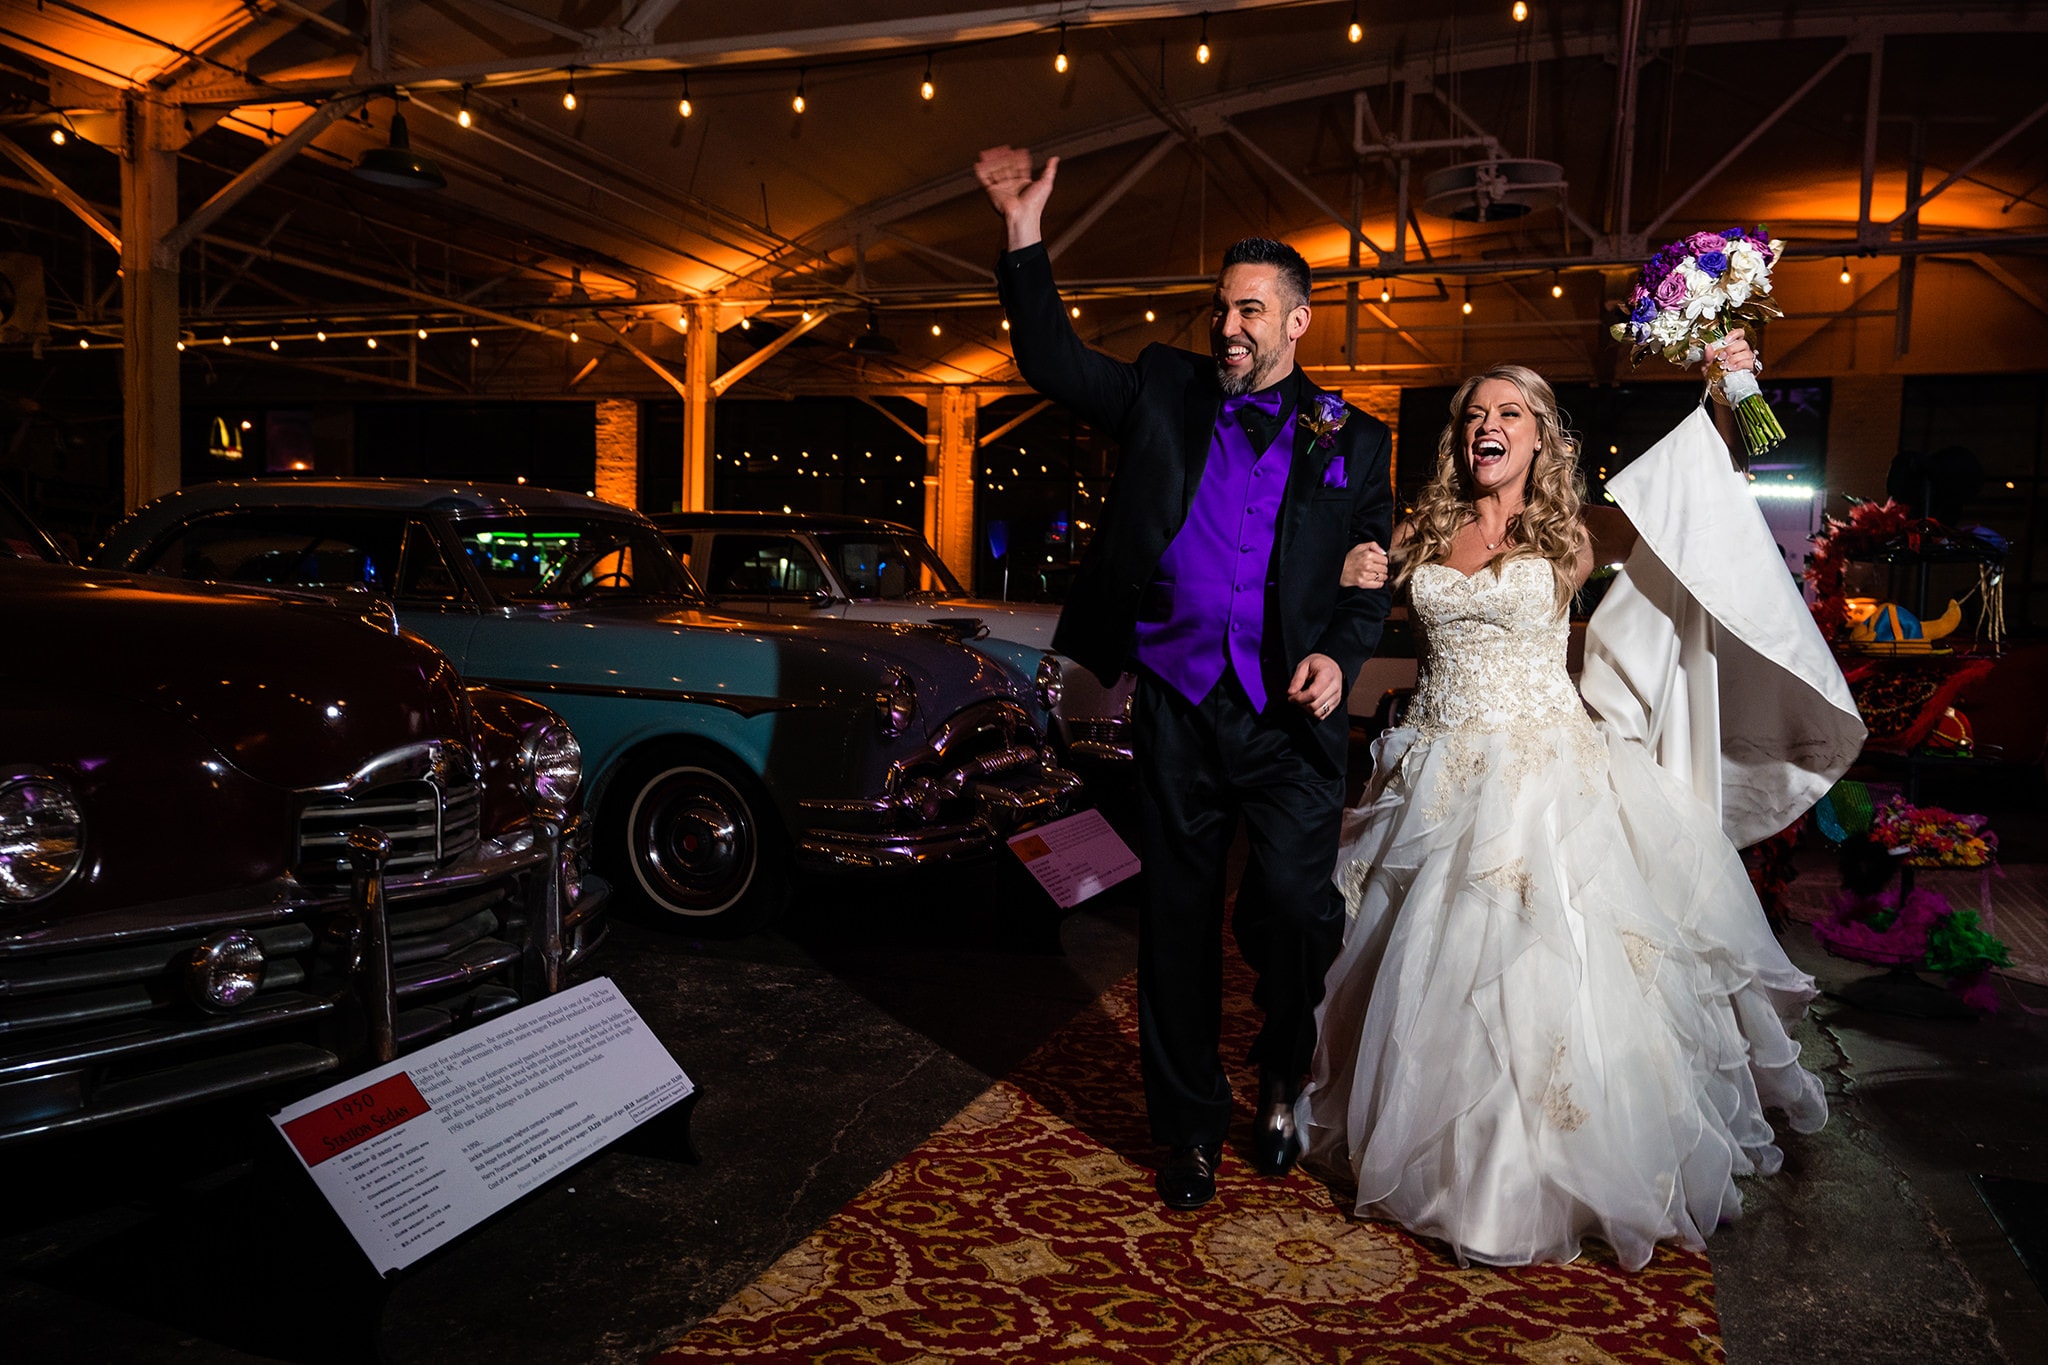 Bride and groom walking into their wedding reception, arms raised at America's Packard Museum by Dayton Wedding Photographer Studio 22 Photography